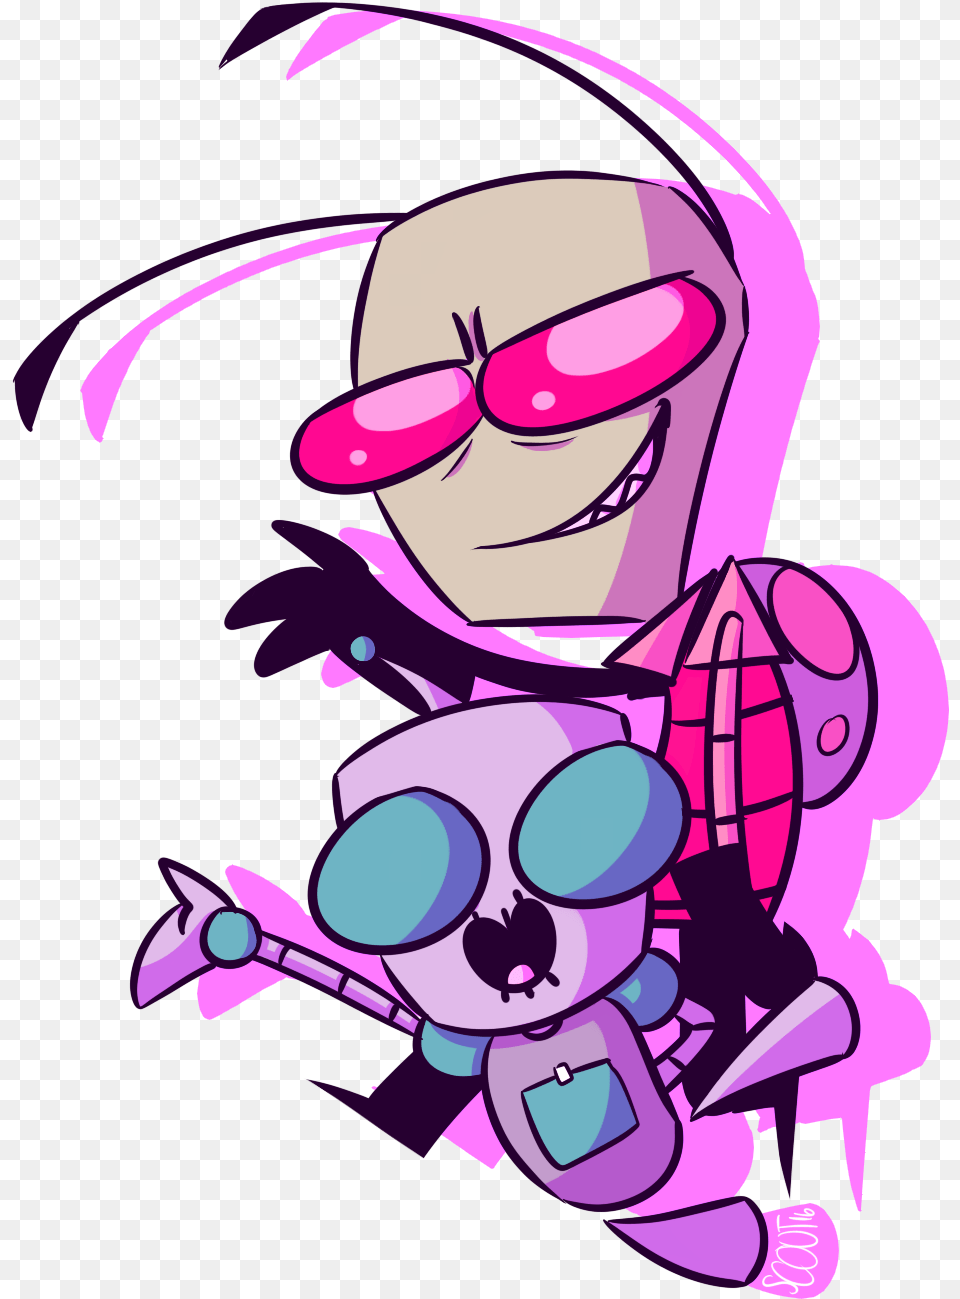 Art By Scoutkln On Tumblr Invader Zim Characters Body Invader Zim Art, Publication, Graphics, Purple, Comics Png Image